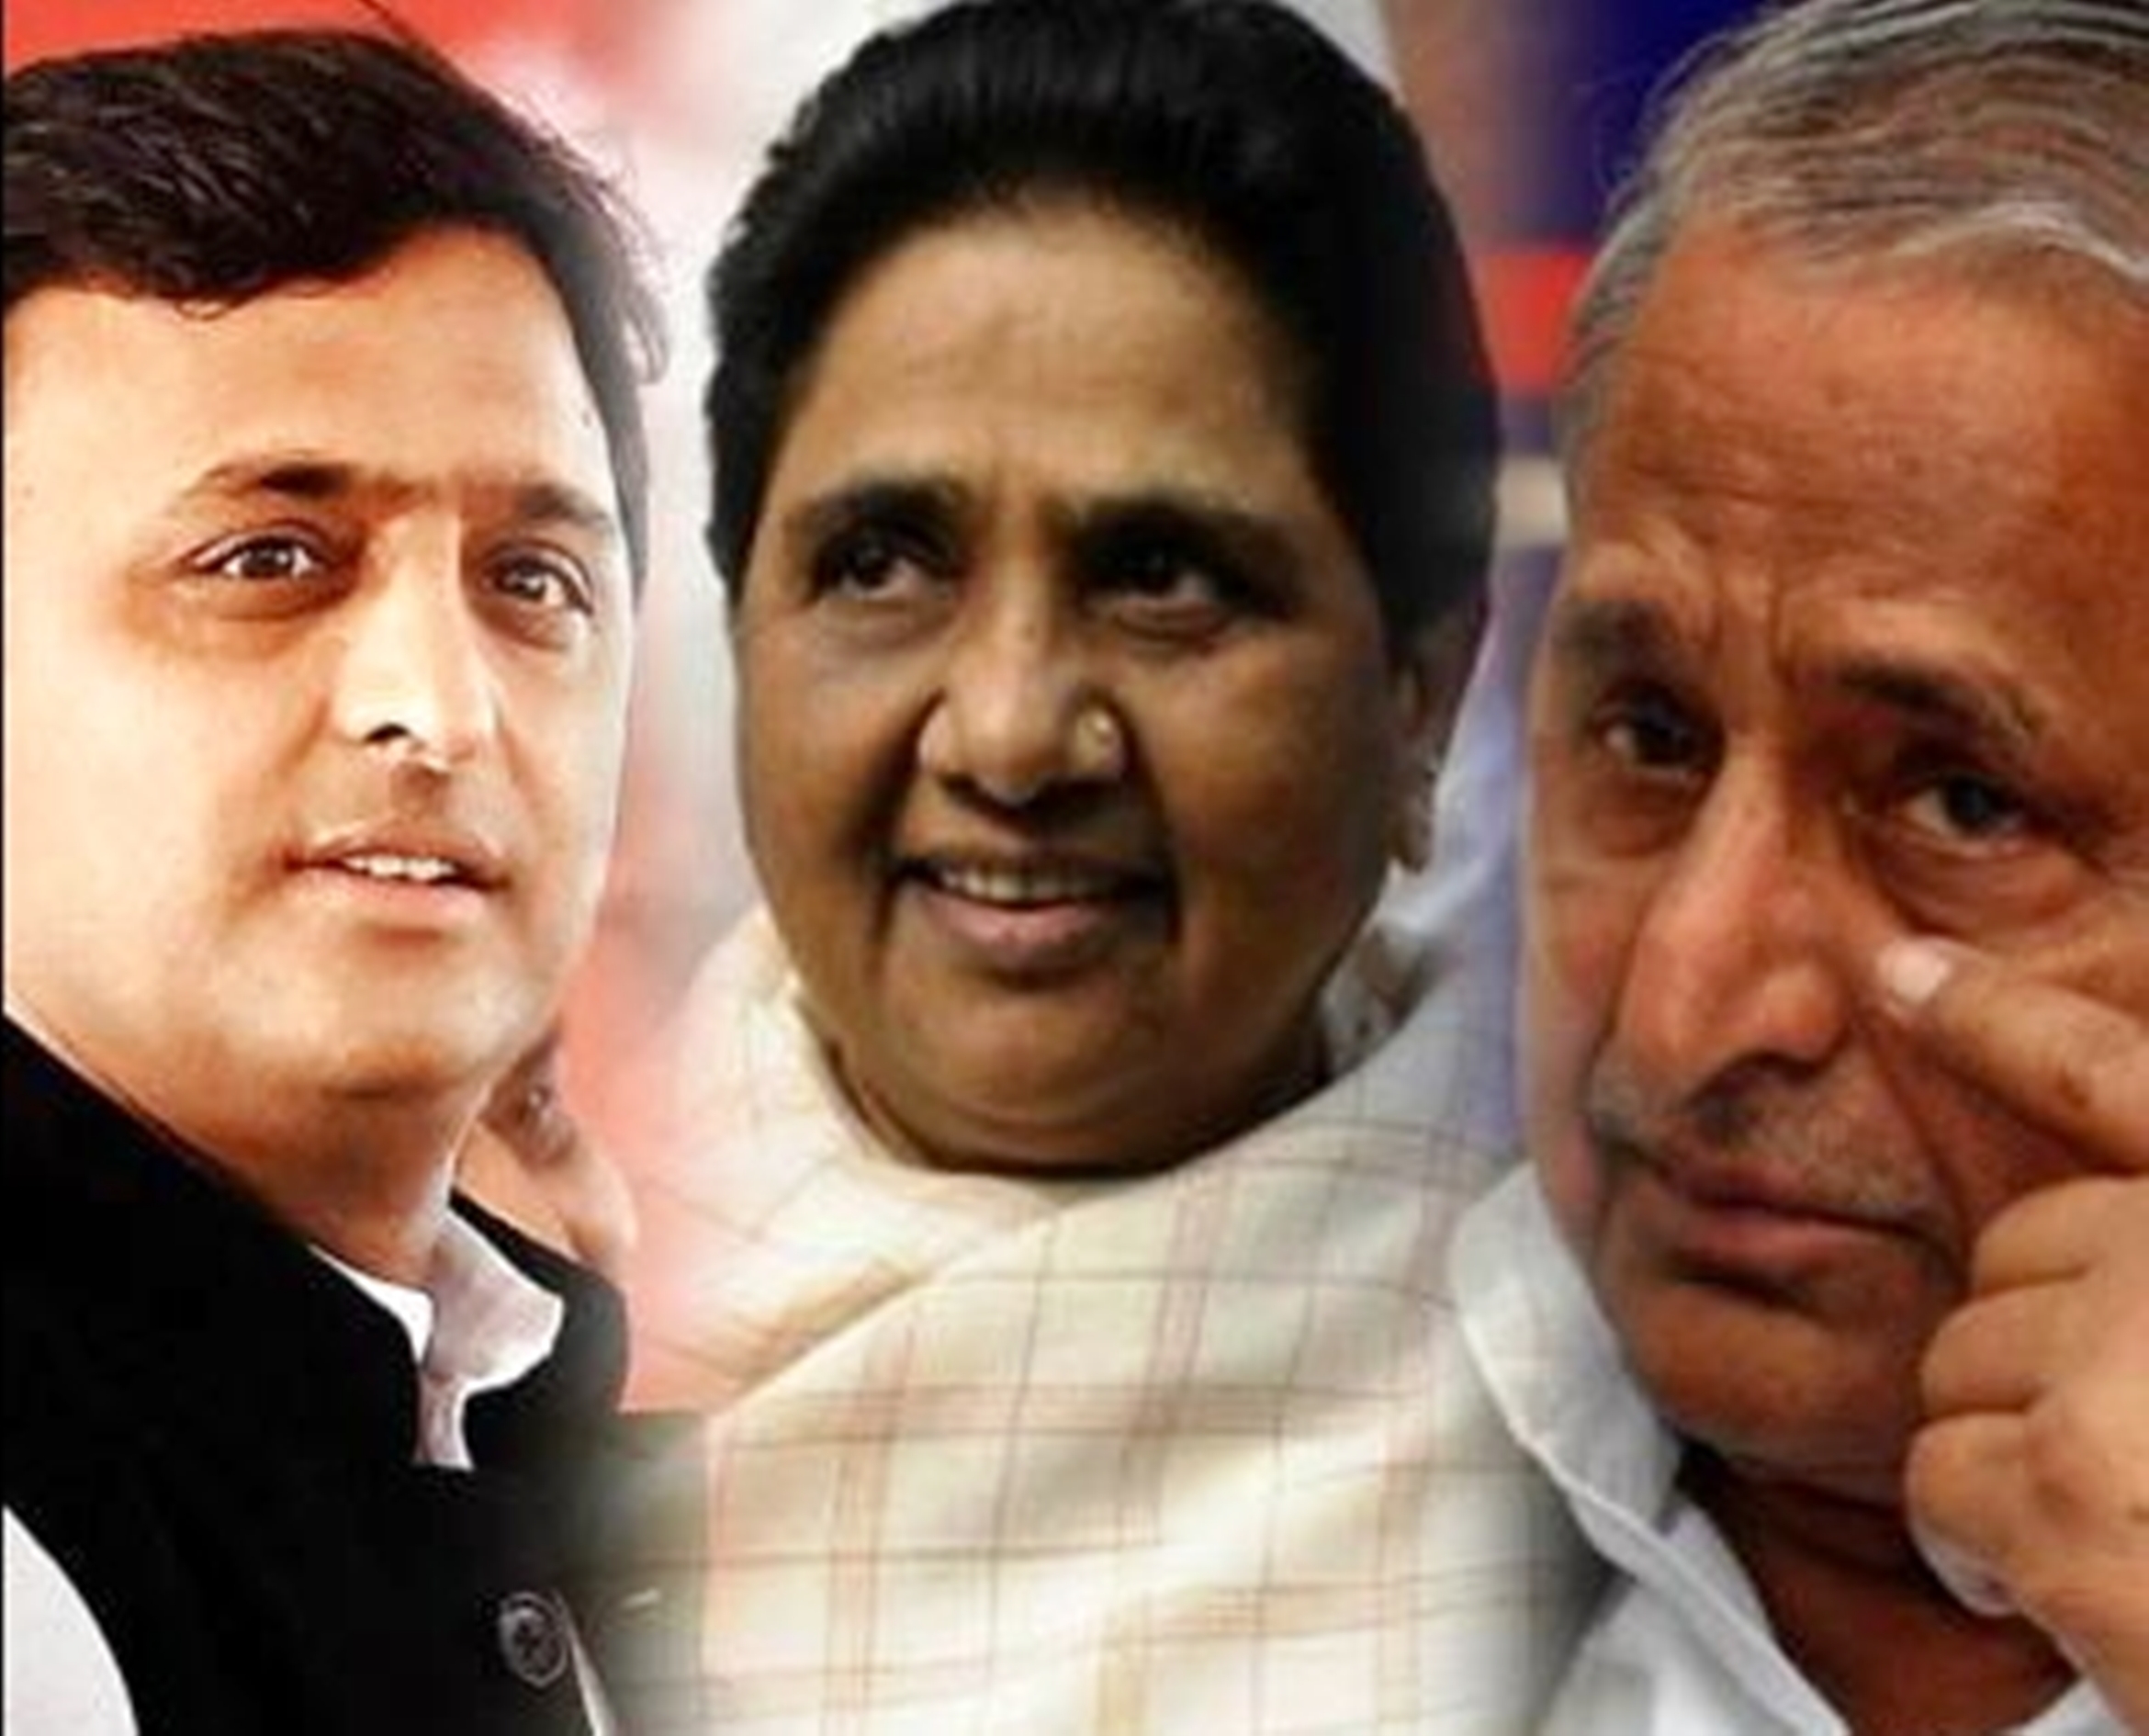 samajwadi party leader said Mulayam Singh with the sp and bsp alliance